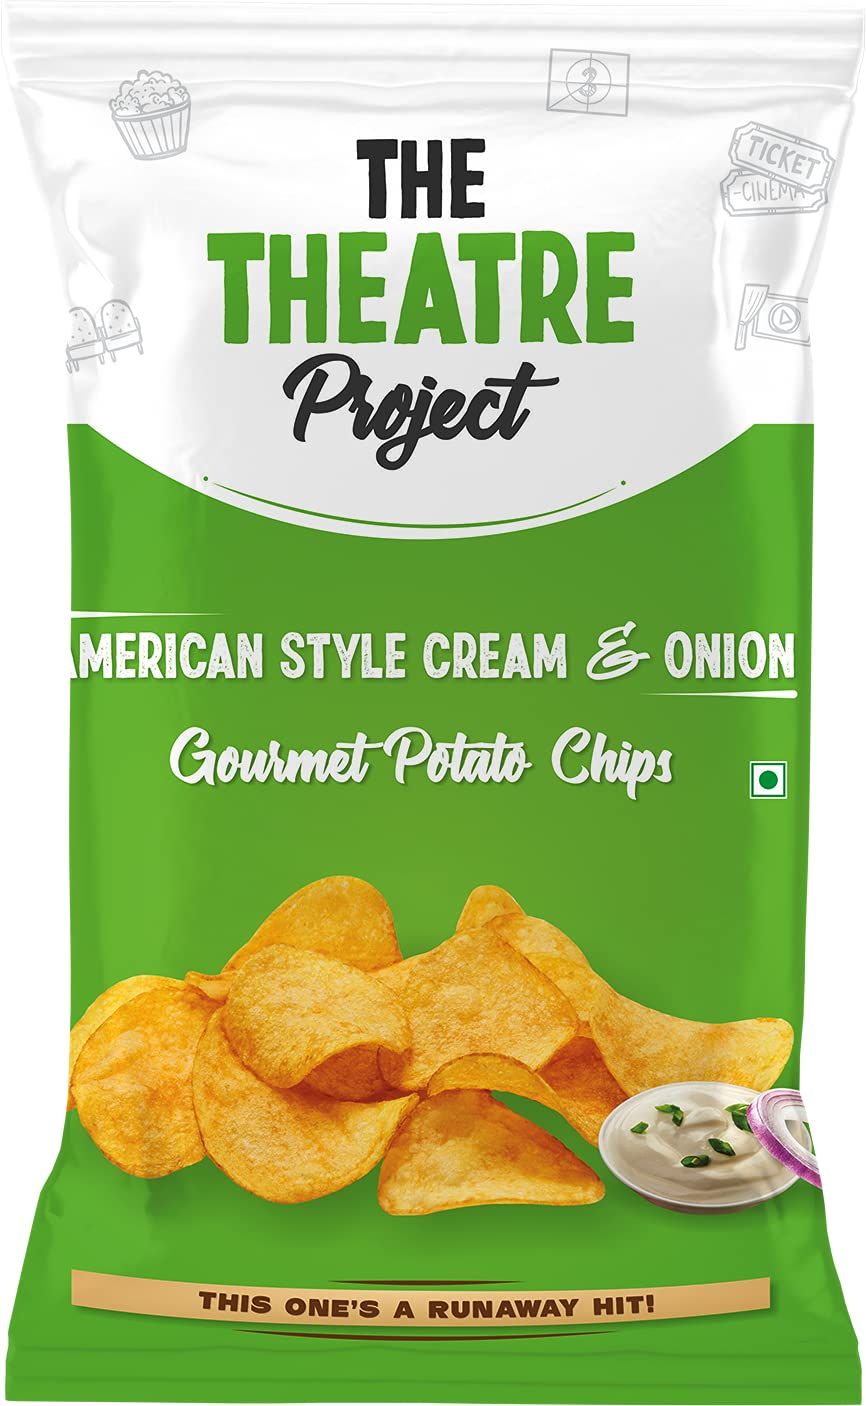 The Theater Project American Style Cream & Onion Image